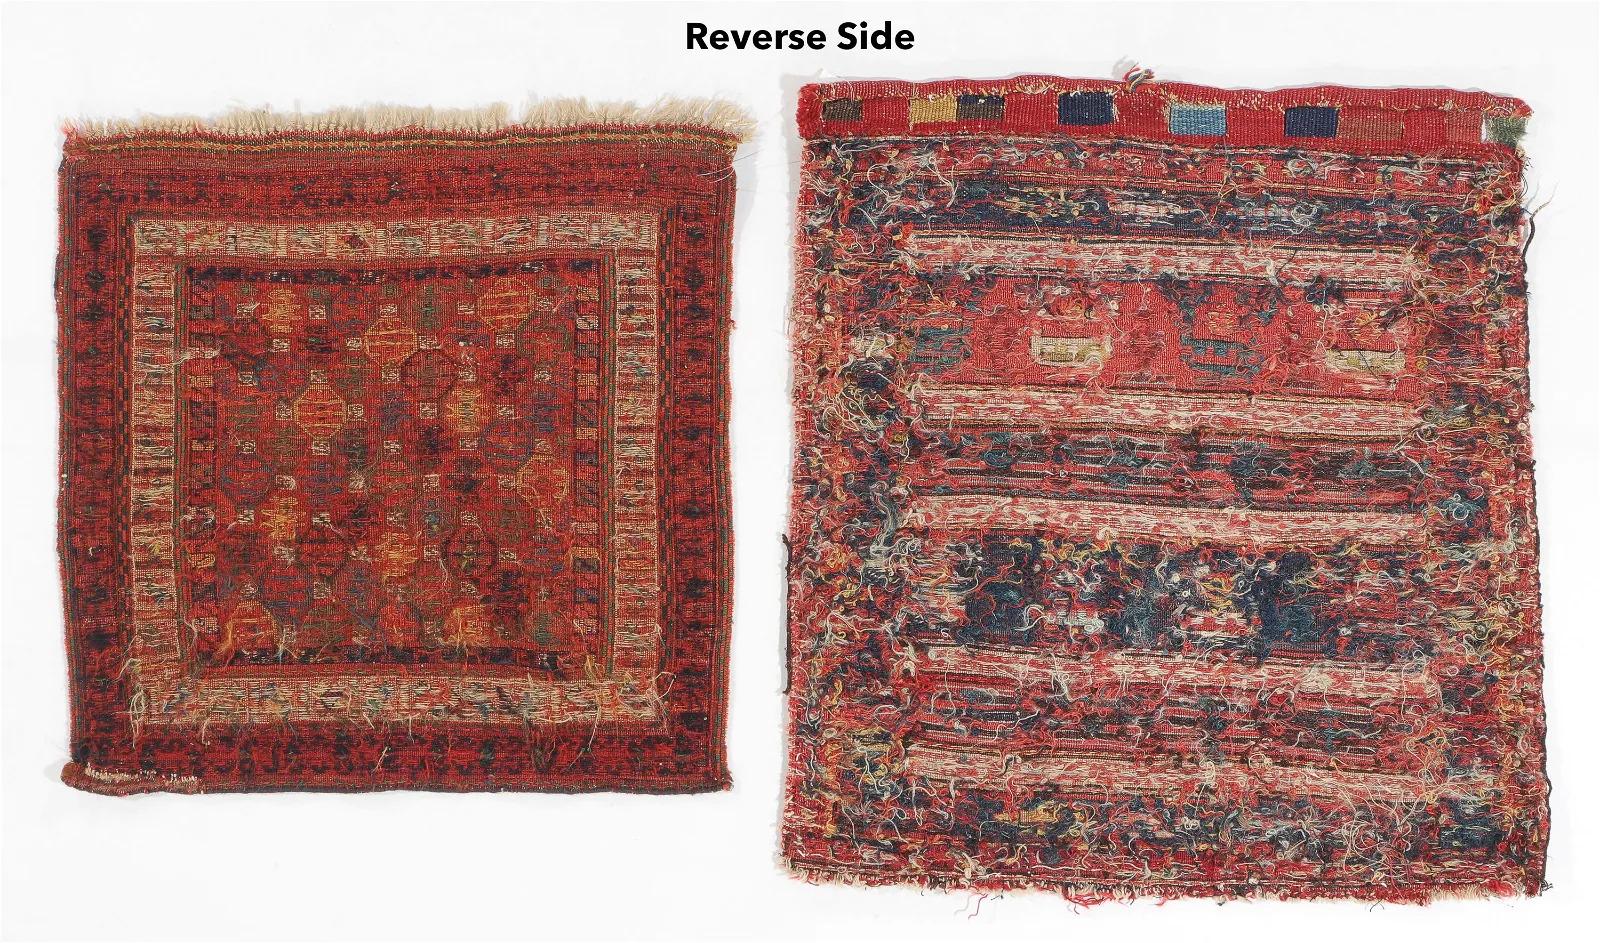 Late 19th Century Two Antique Persian Collectible Shahsavan Sumak Rugs 1.10' x 2', 1870s - 2B28 For Sale